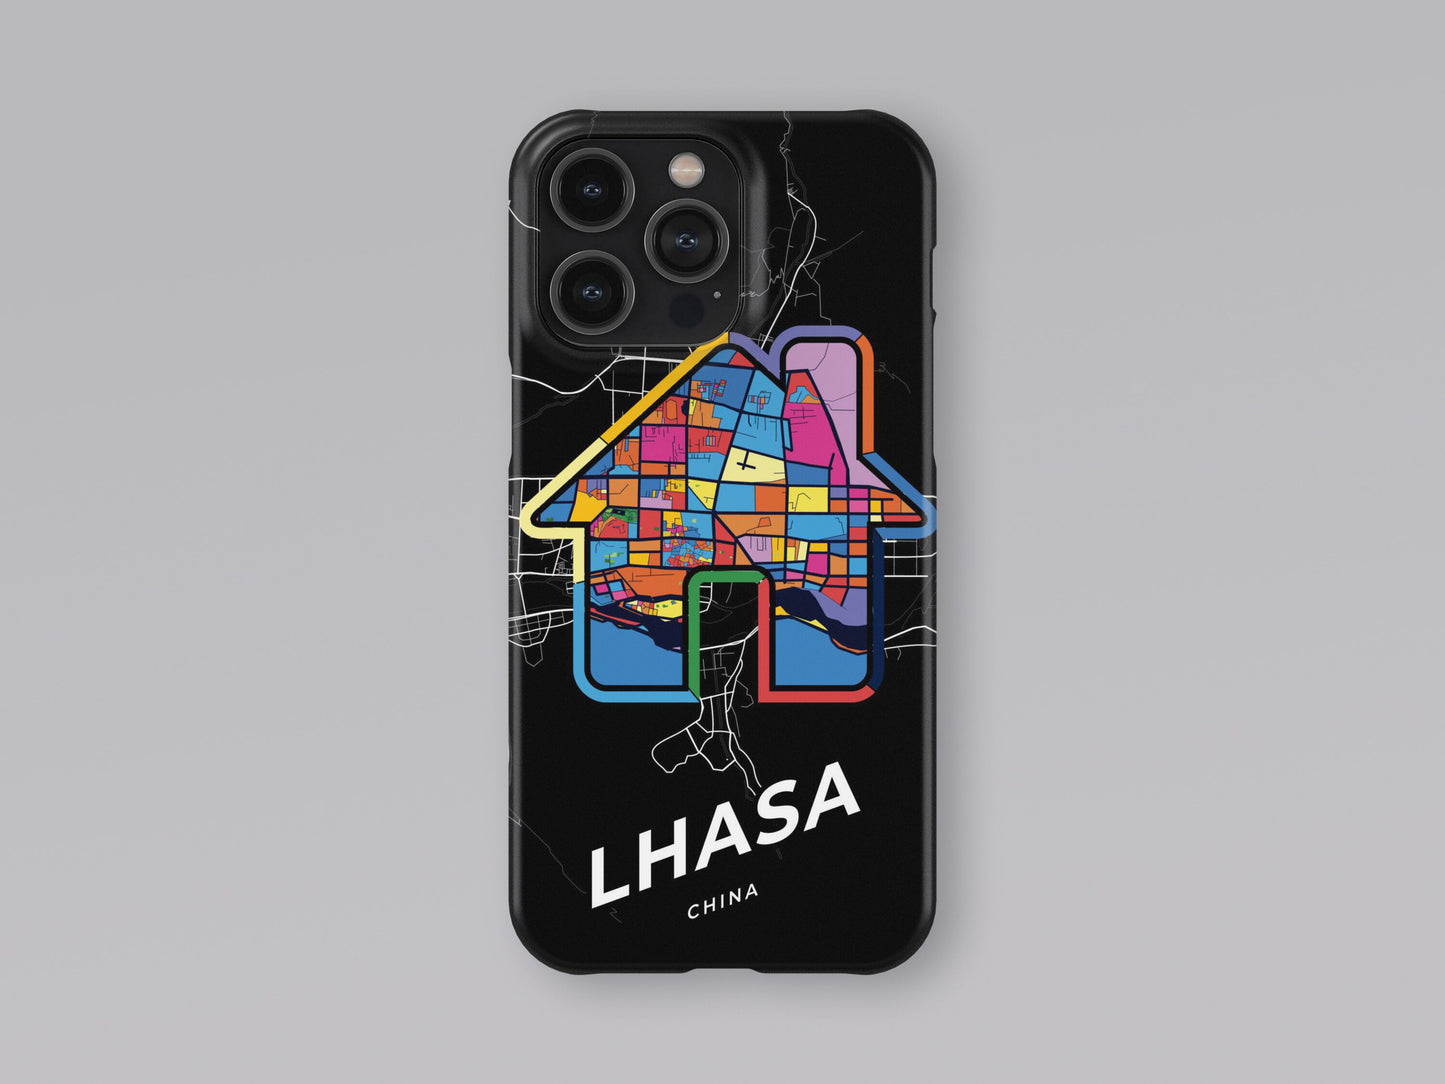 Lhasa China slim phone case with colorful icon. Birthday, wedding or housewarming gift. Couple match cases. 3